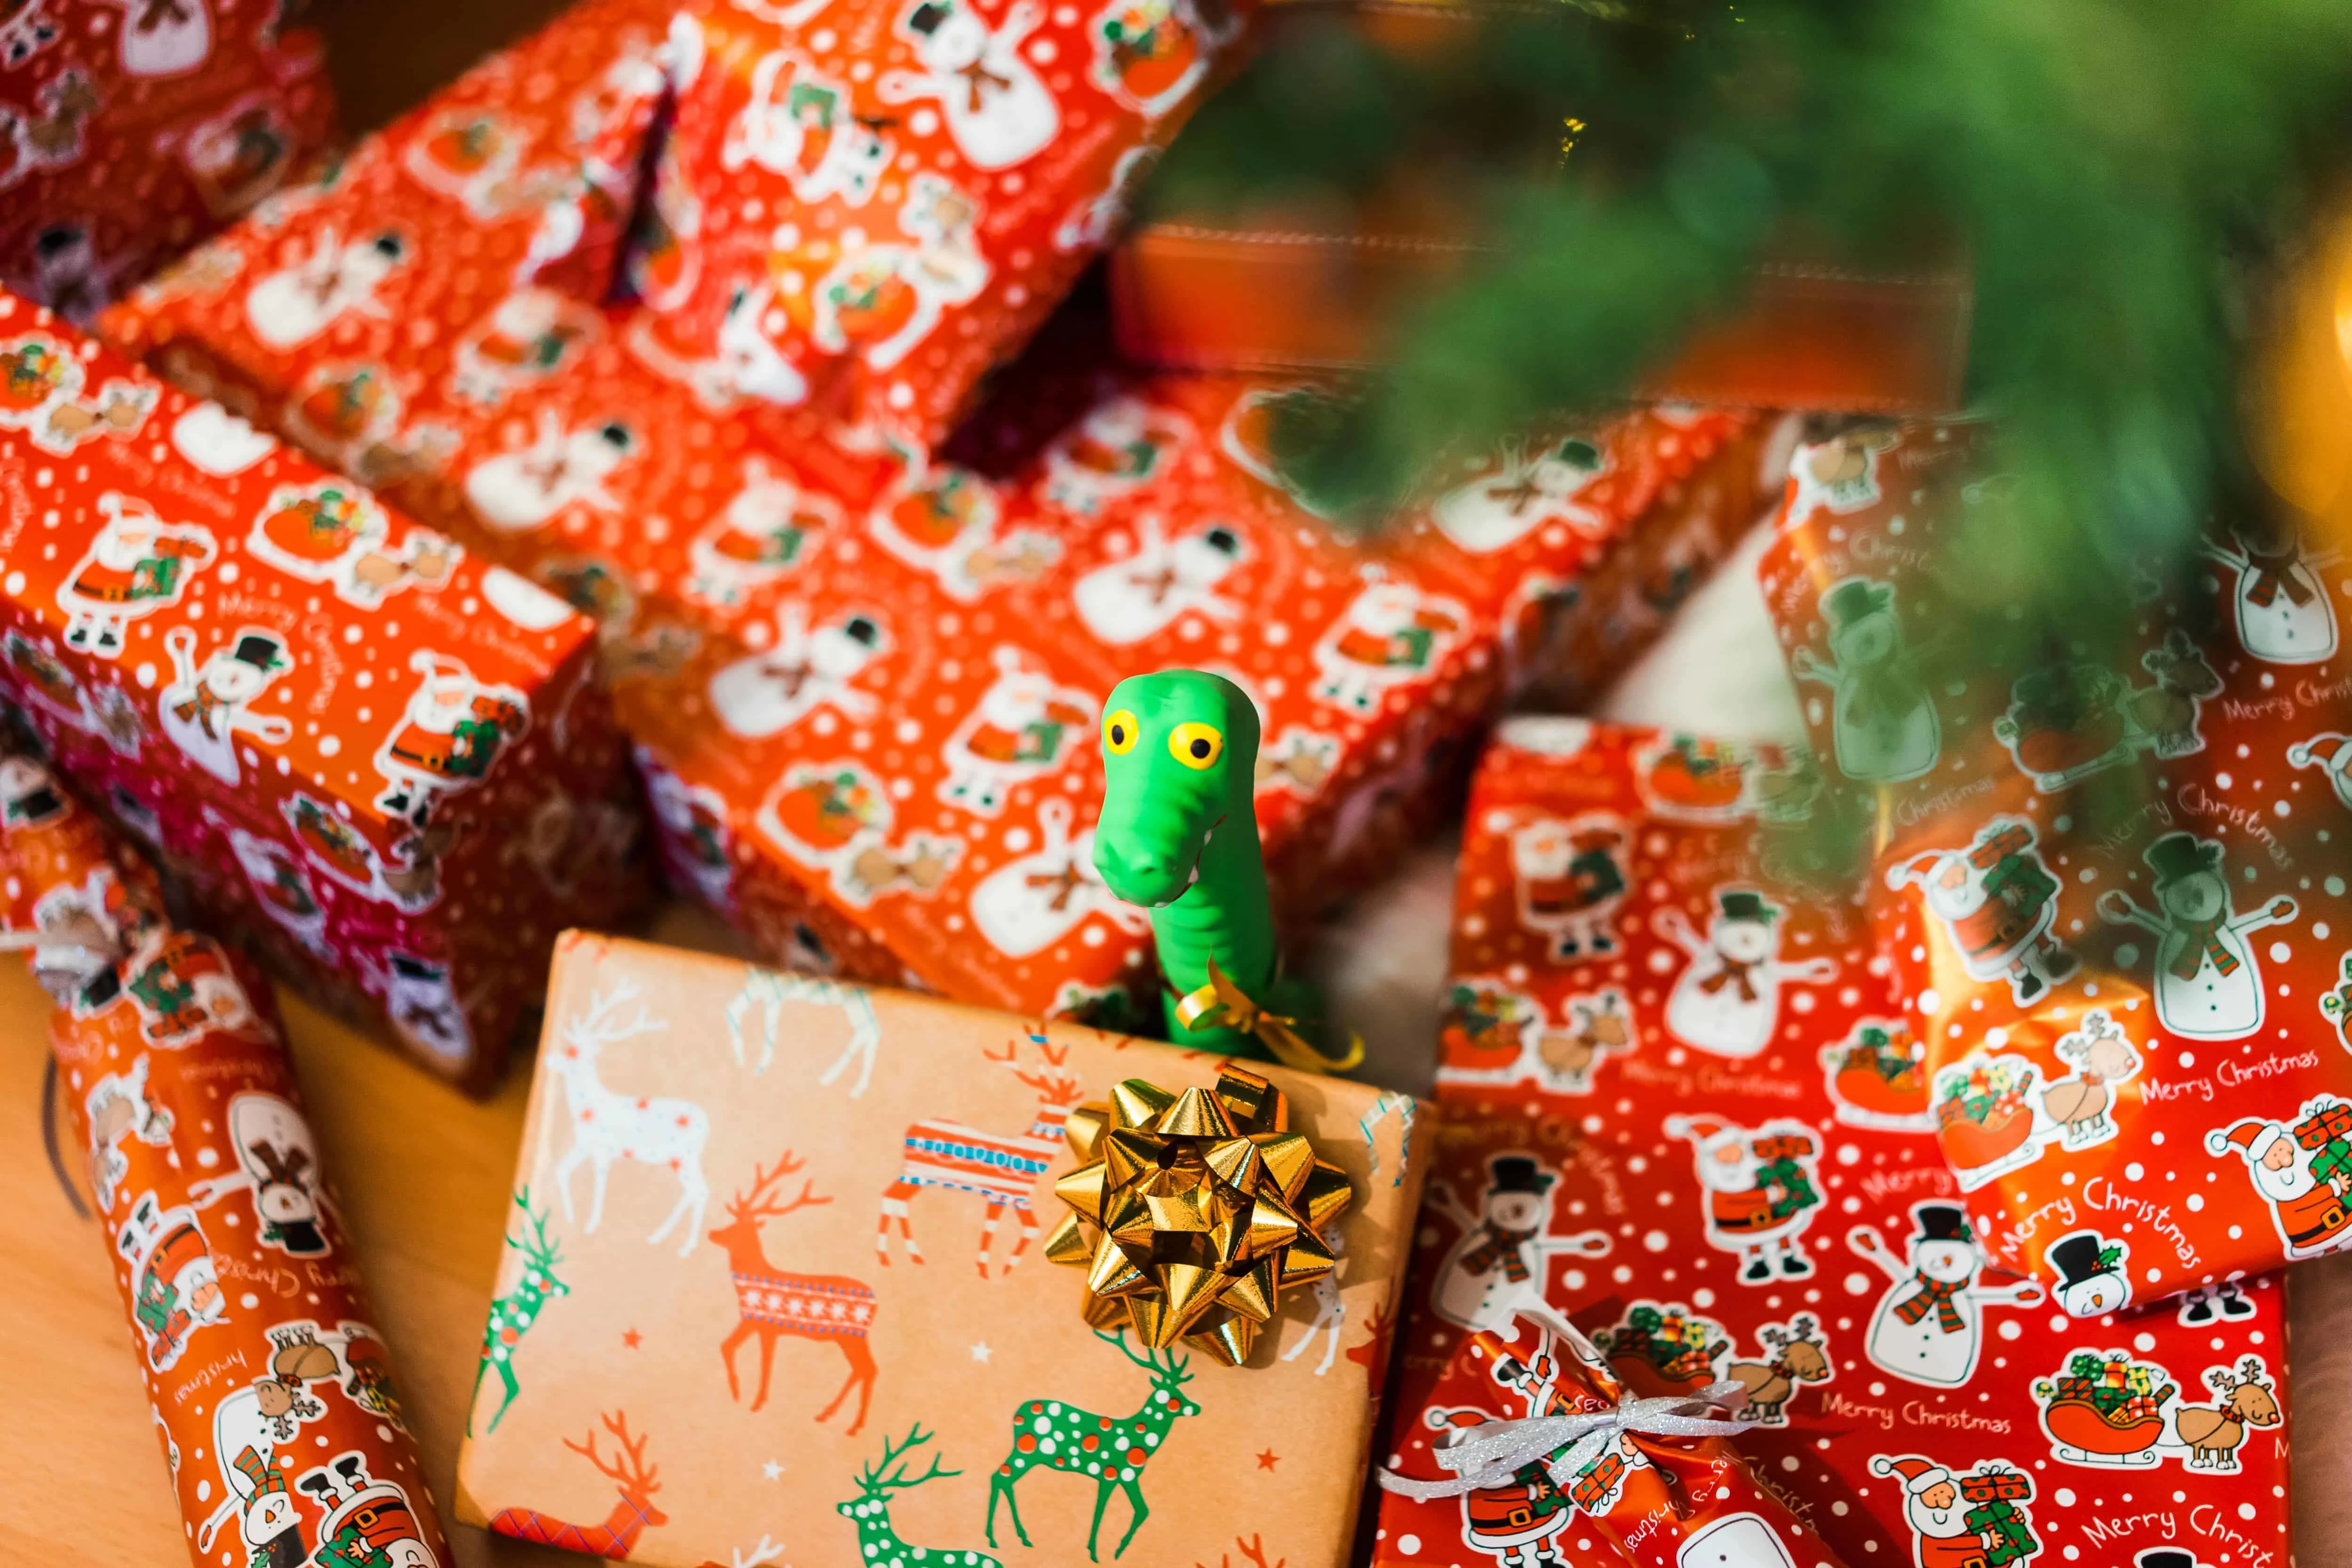 Christmas gifts under tree with toy dinosaur